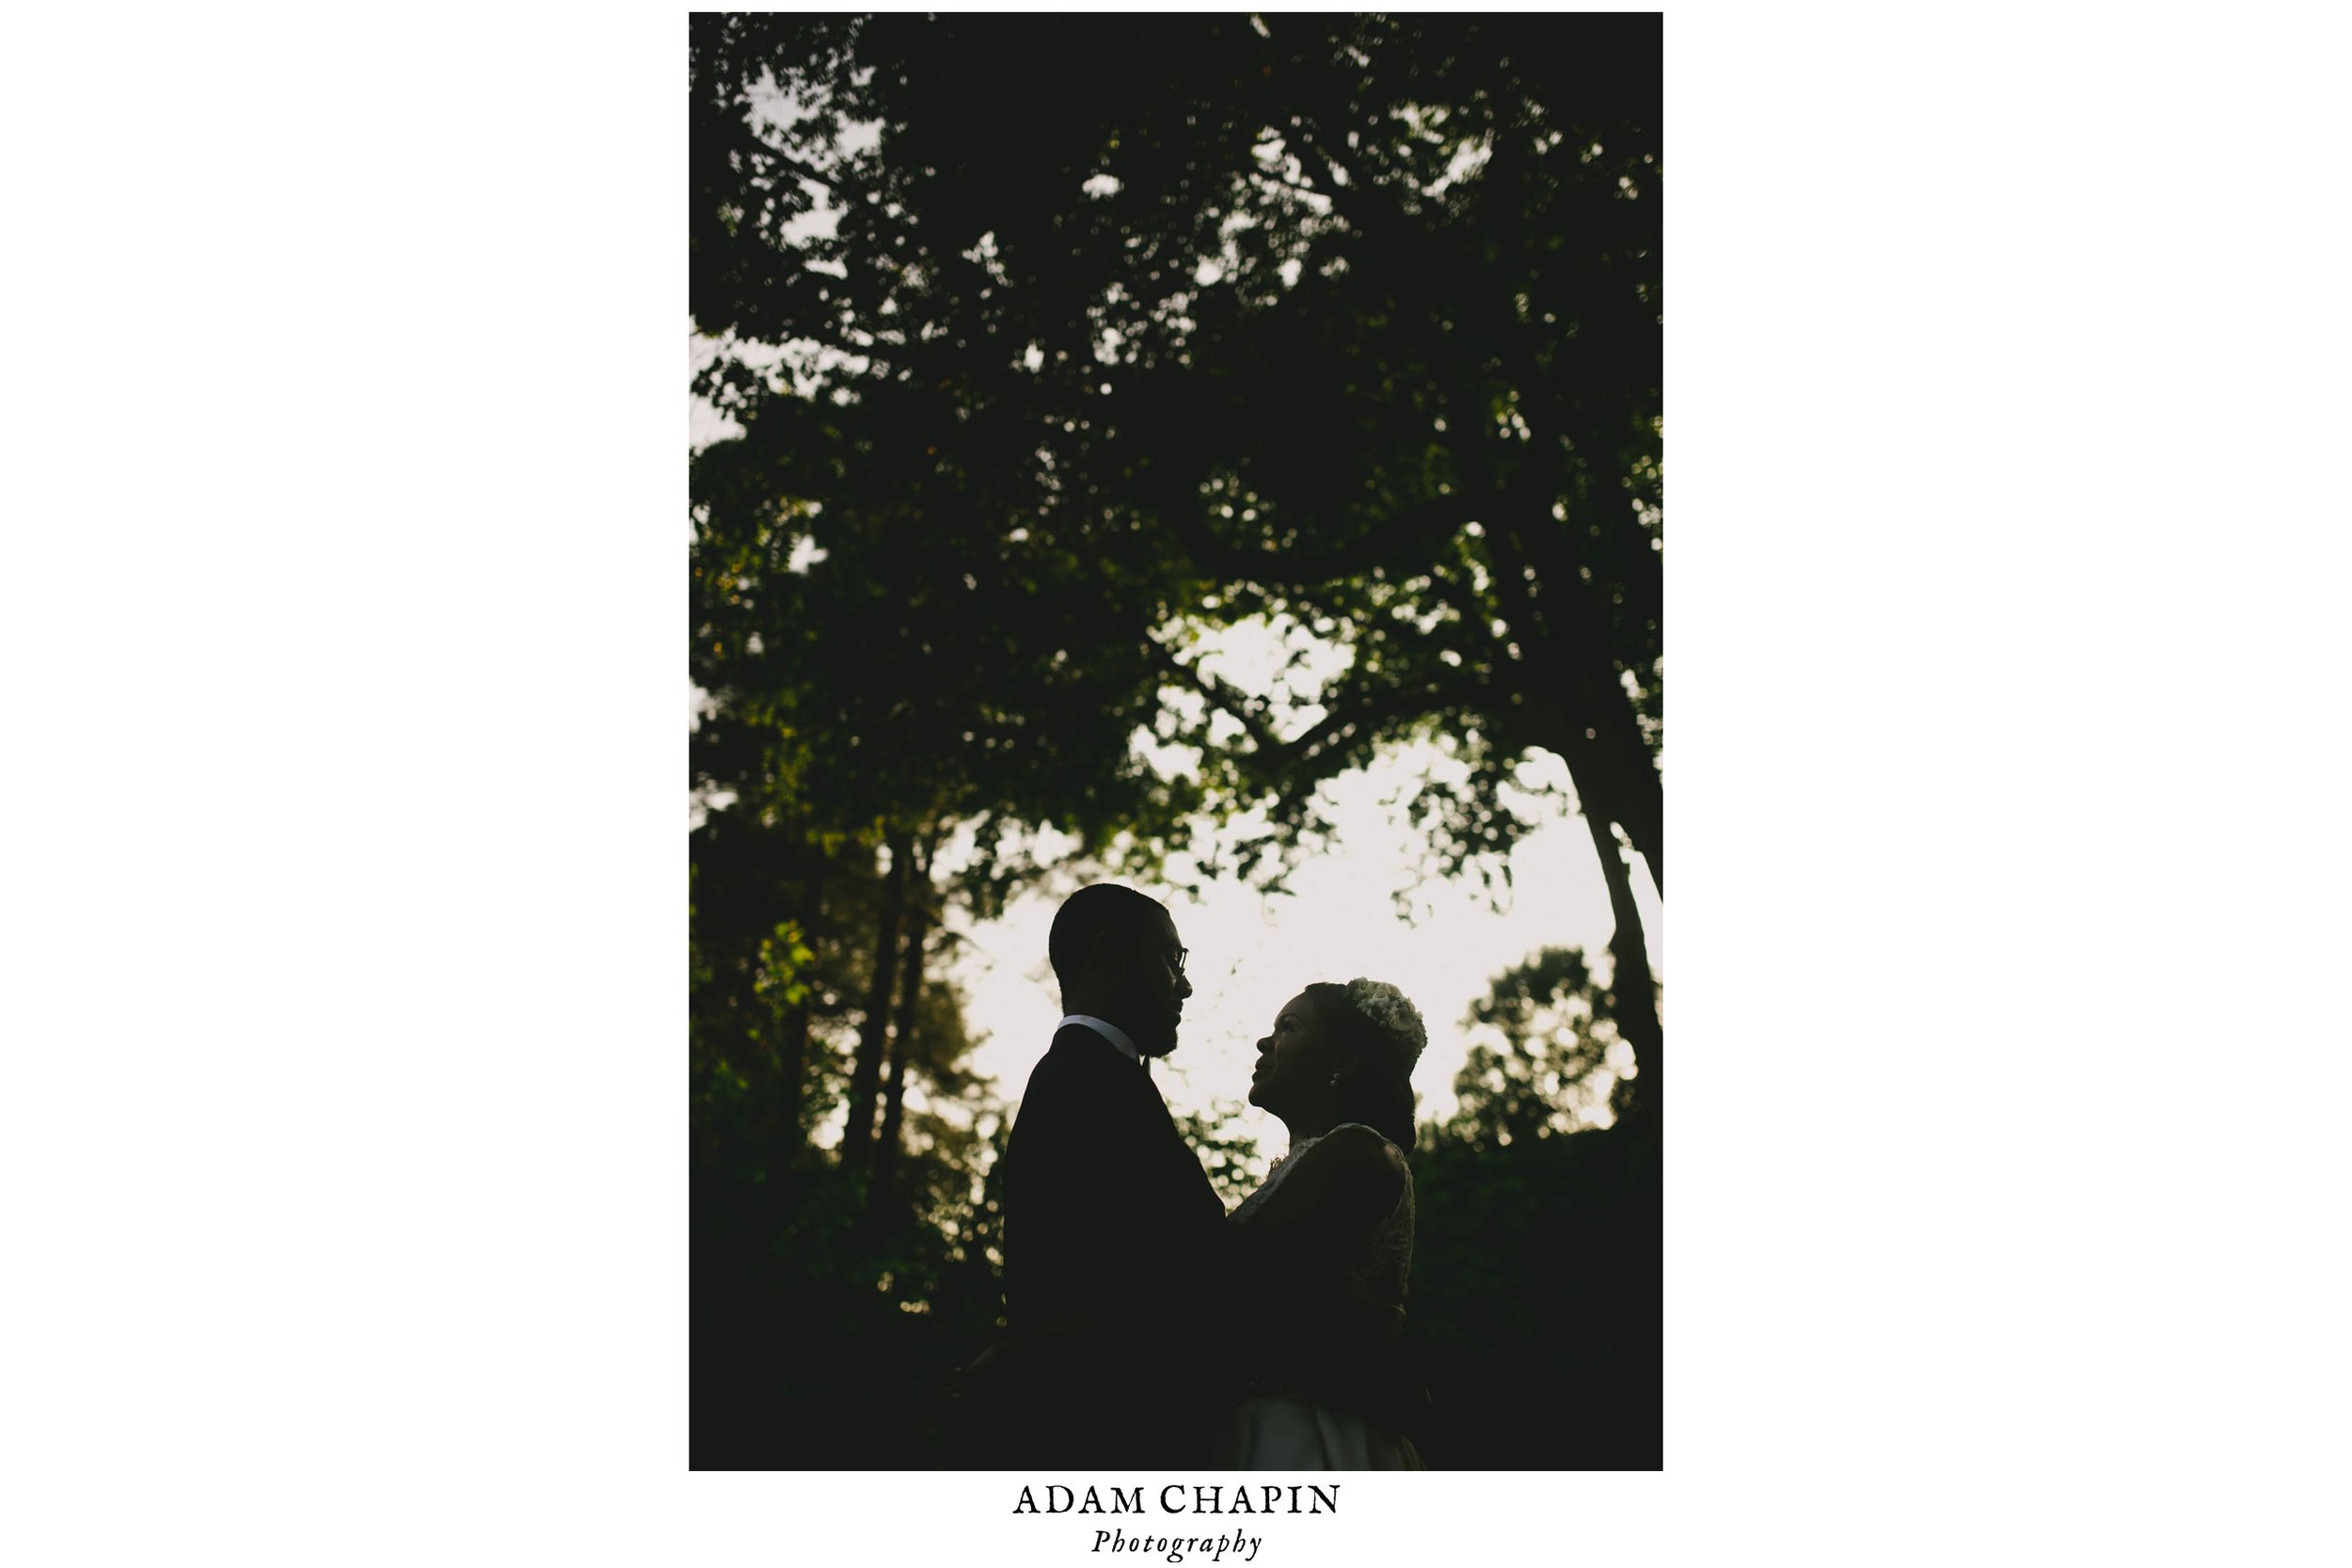 The bride and groom framed beautifully by the surrounding oak trees at the Umstead Hotel and Spa